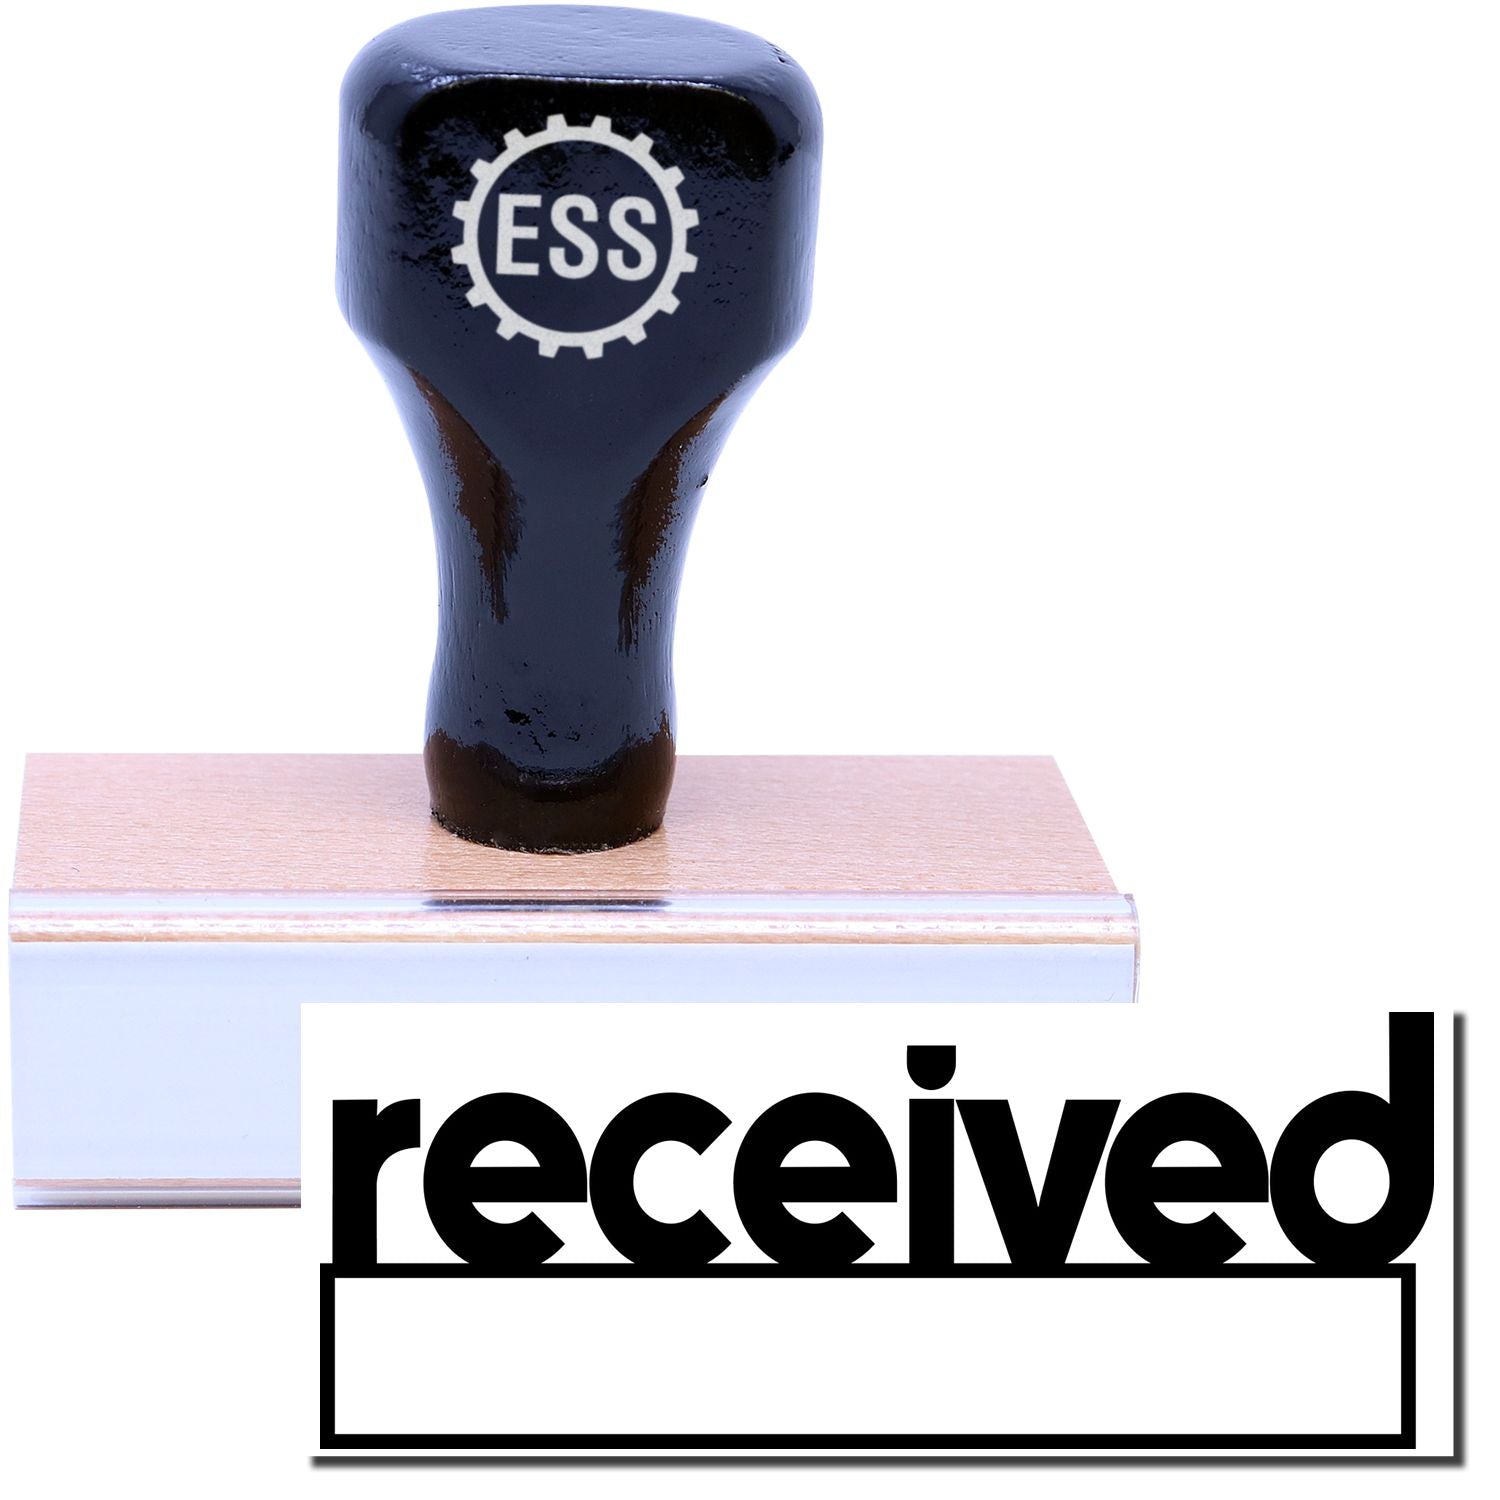 A stock office rubber stamp with a stamped image showing how the text "received" in lowercase letters with a date box underneath the text is displayed after stamping.